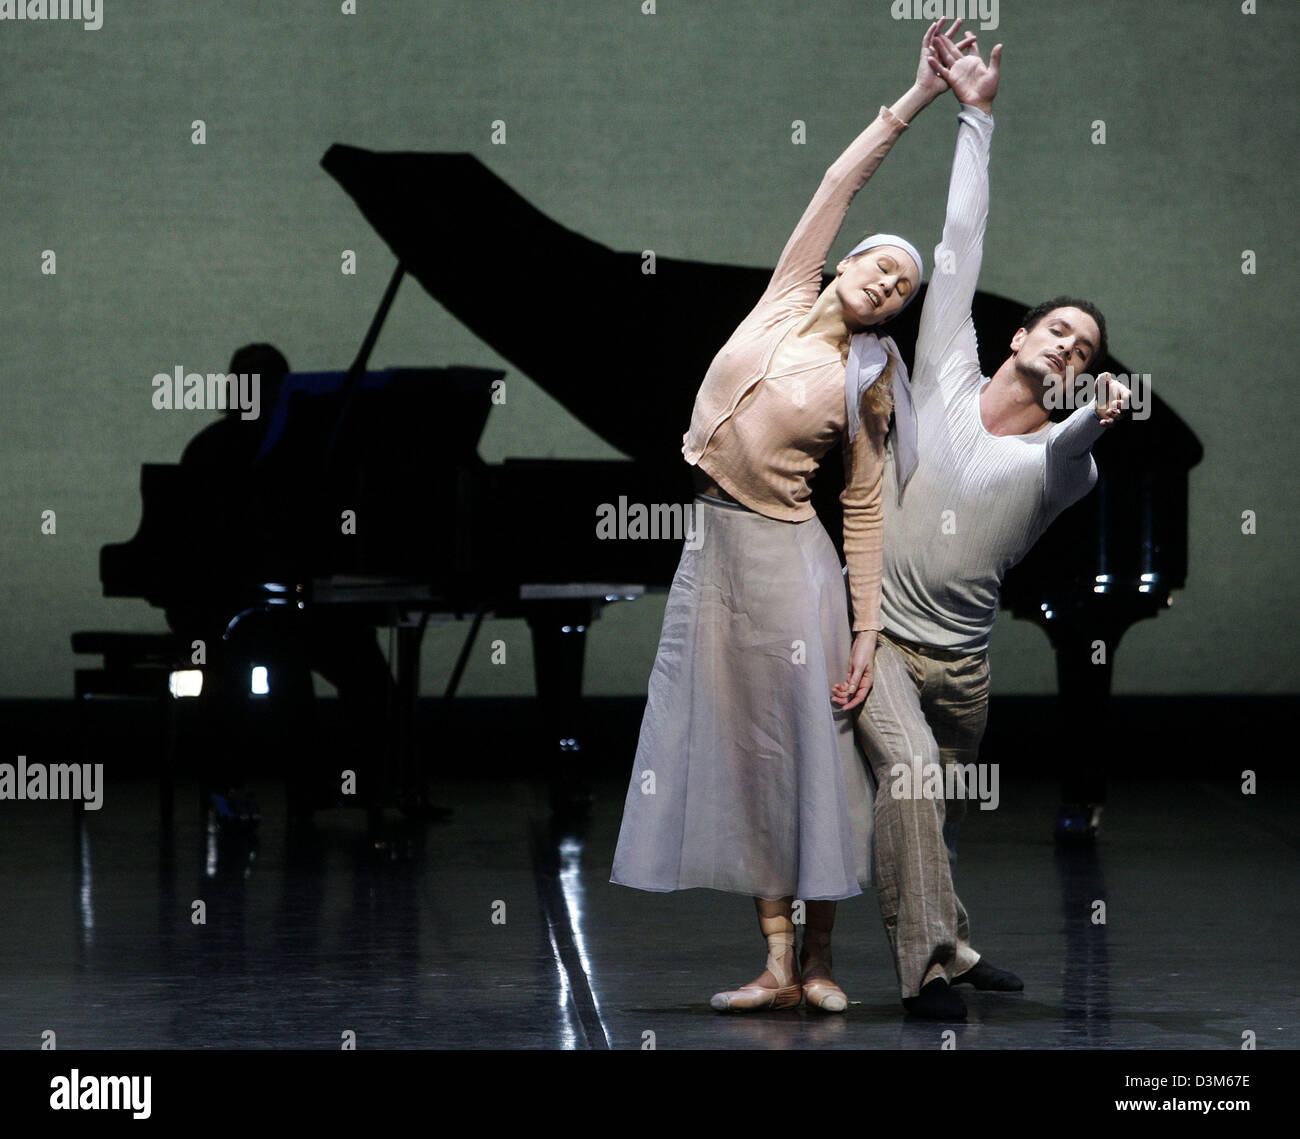 (dpa) - Members of the ensemble rehearse the ballet piece 'Nocturnes' to the music of Frederic Chopin in the State Opera of Hamburg, Germany, 2 December 2005. Under the title 'Songs of the night' John Neumeier choreographed the ballets 'Nocturnes' and 'Night hike' of Gustav Mahler's 7th symphony performing first on 4 December 2005. Photo: Ulrich Perrey Stock Photo